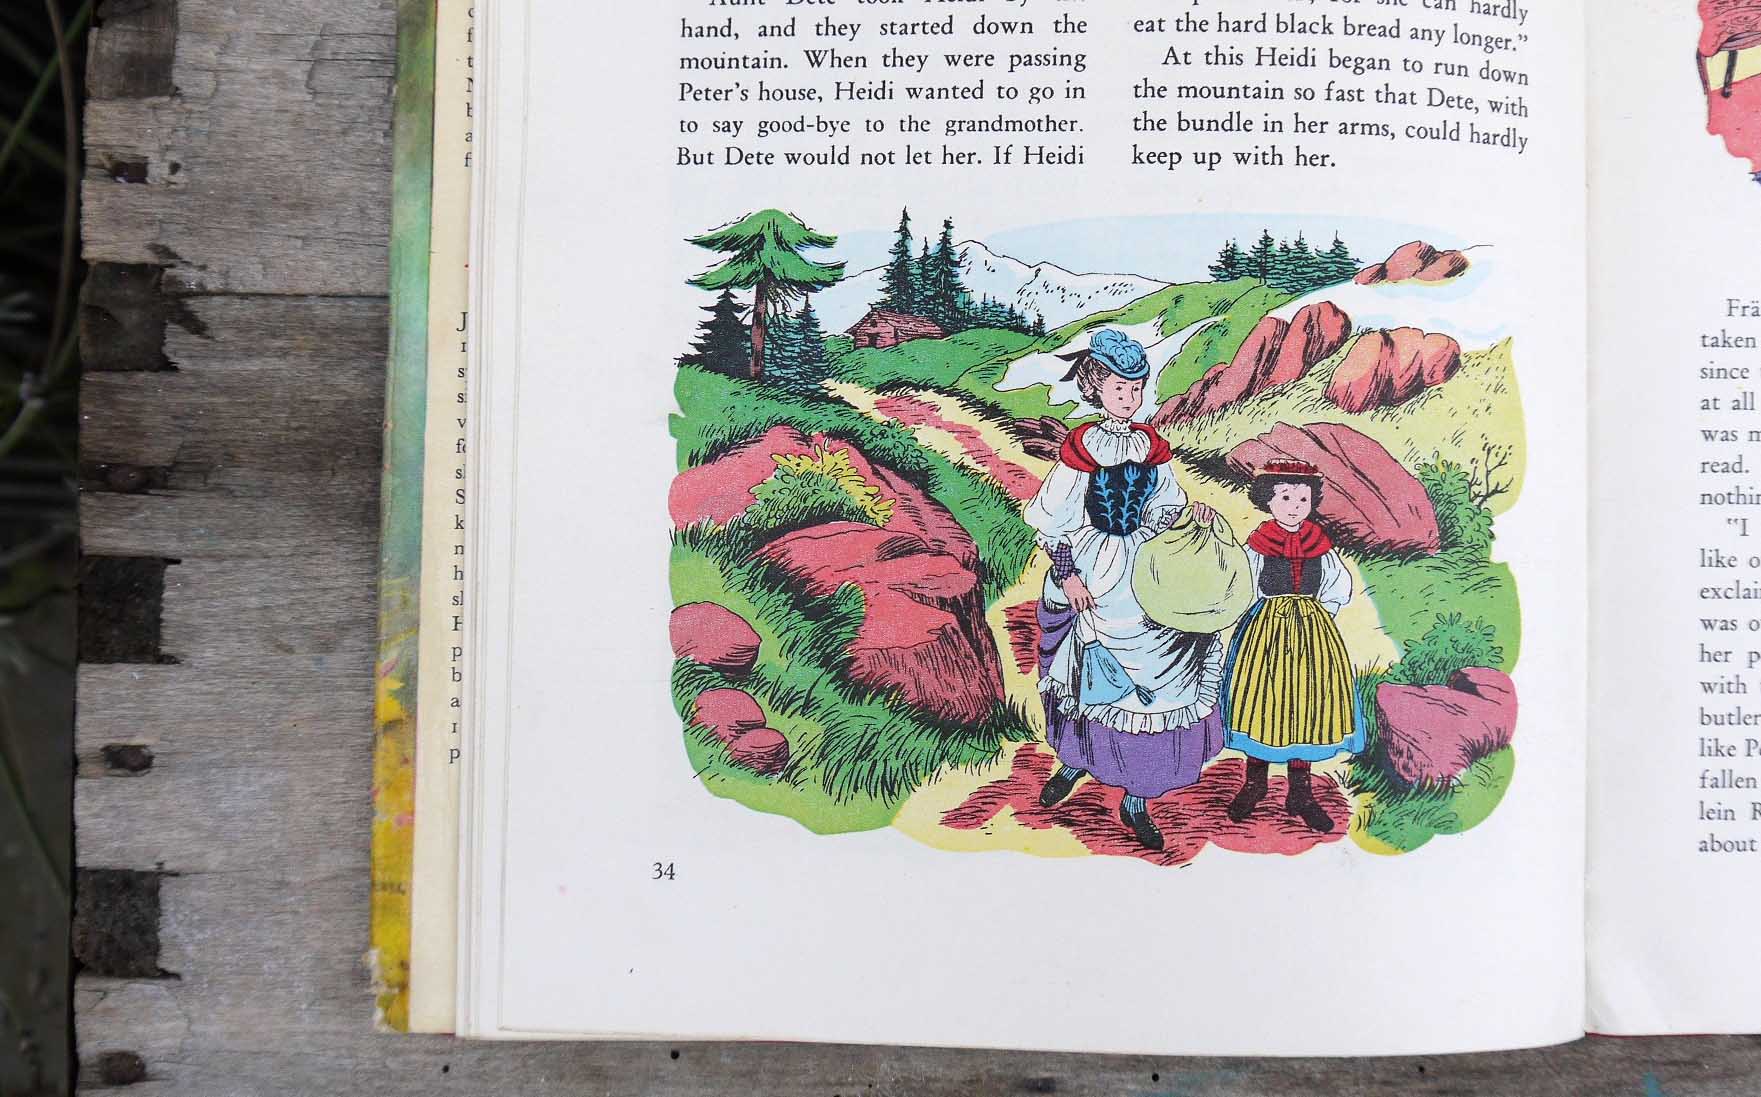 Gorgeous colourful 1956 copy of the children's classic Heidi.